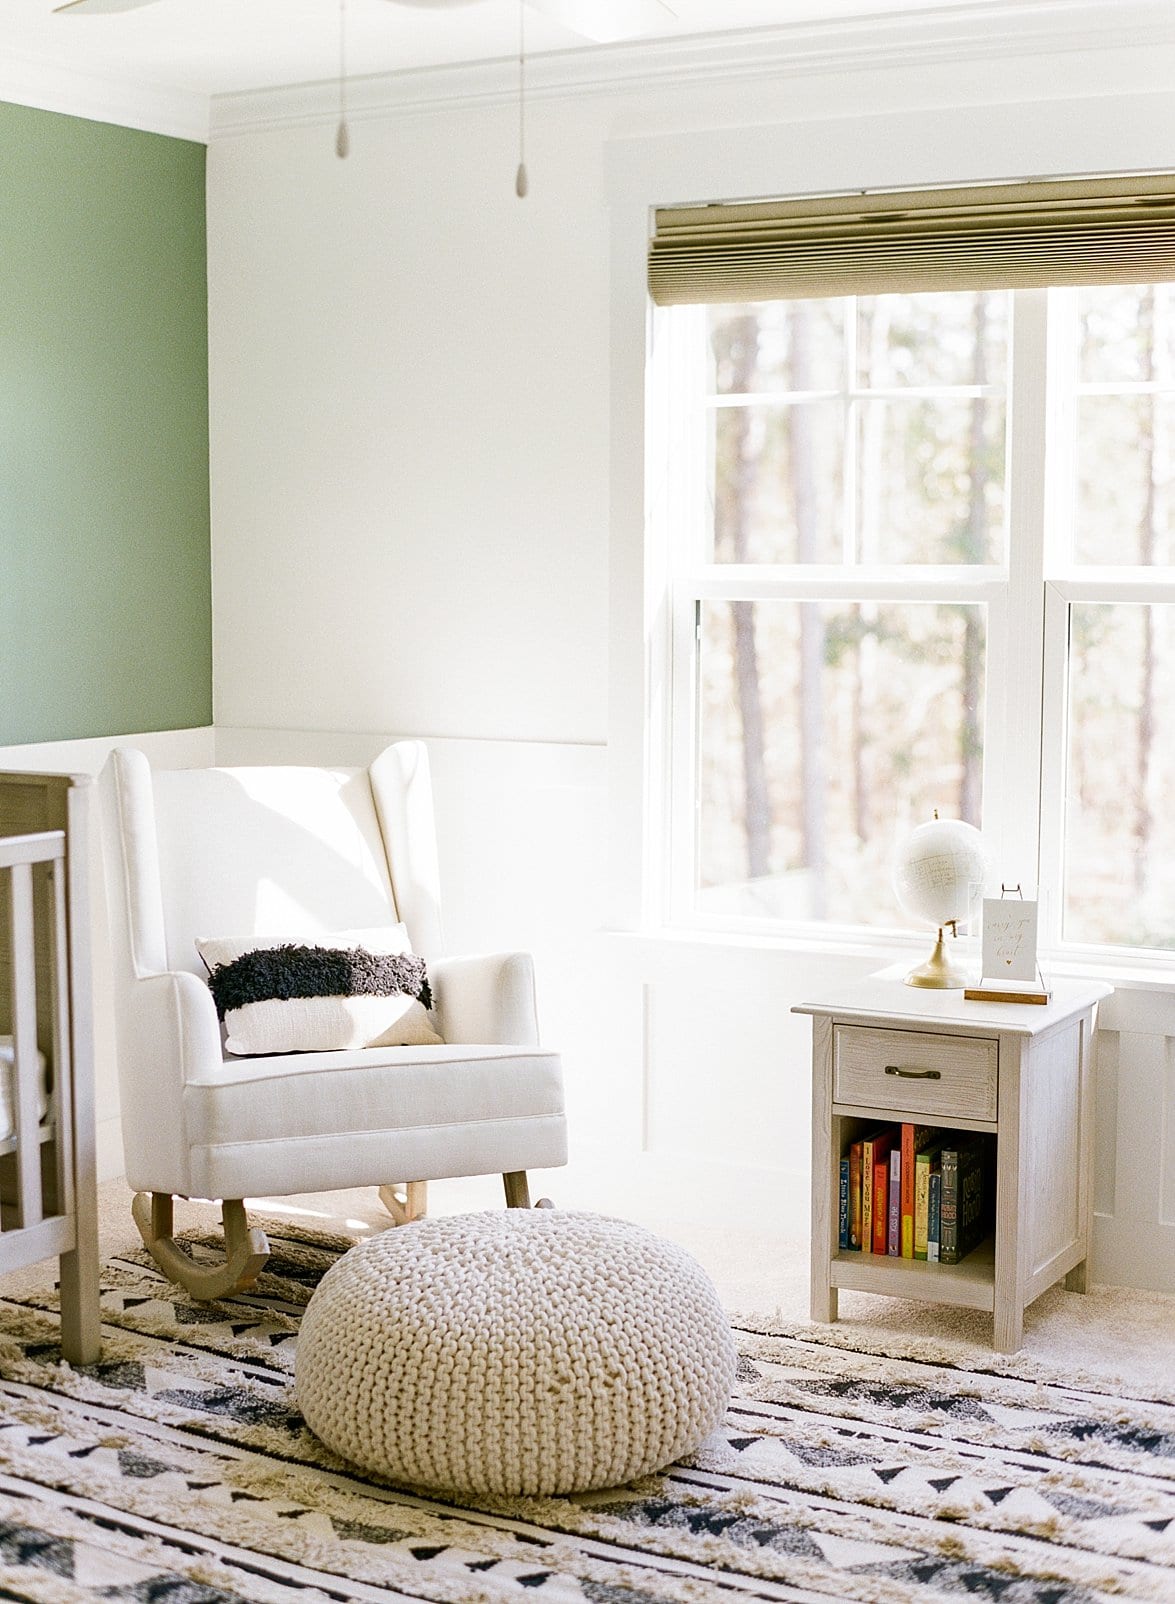 Apex newborn nursery with white rocking chair in front of a green nursery wall photo